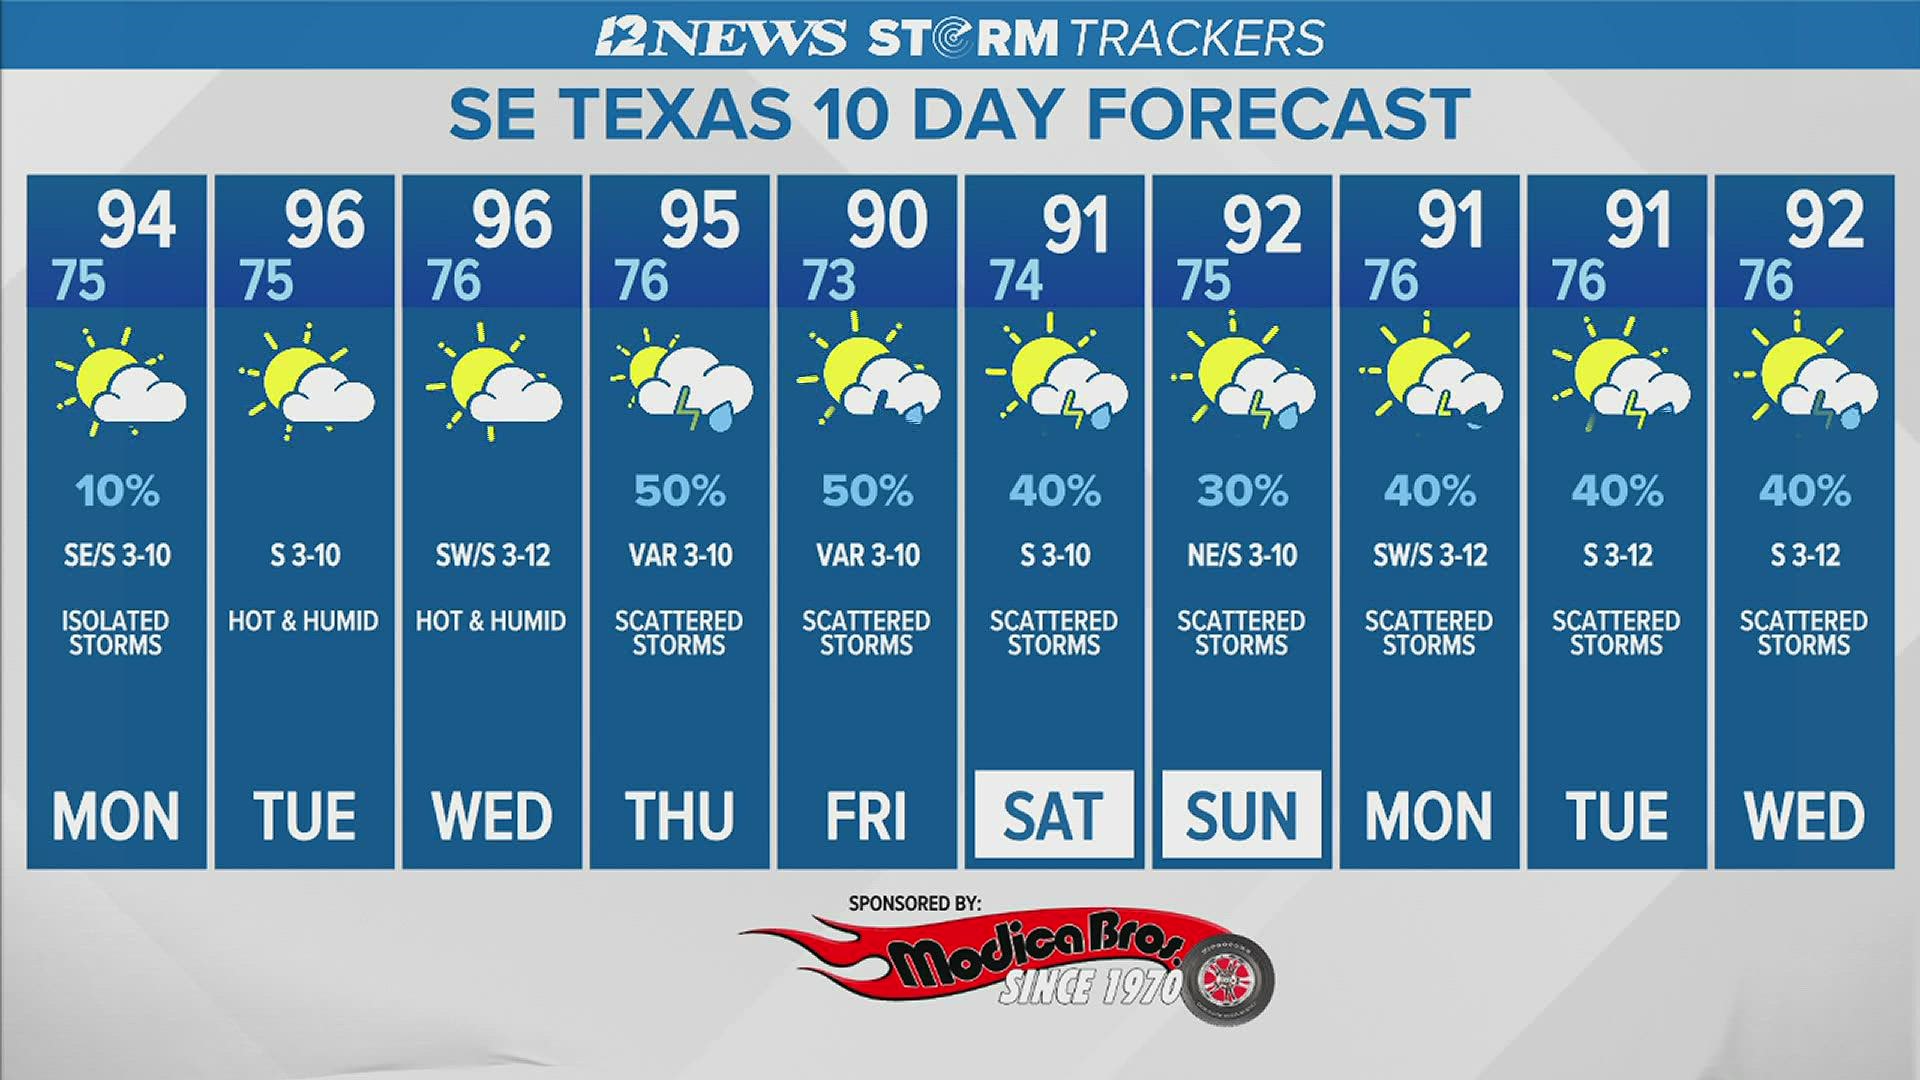 Monday, Tuesday and Wednesday, slim rain chances are forecast with highs inching upwards through the middle 90s.